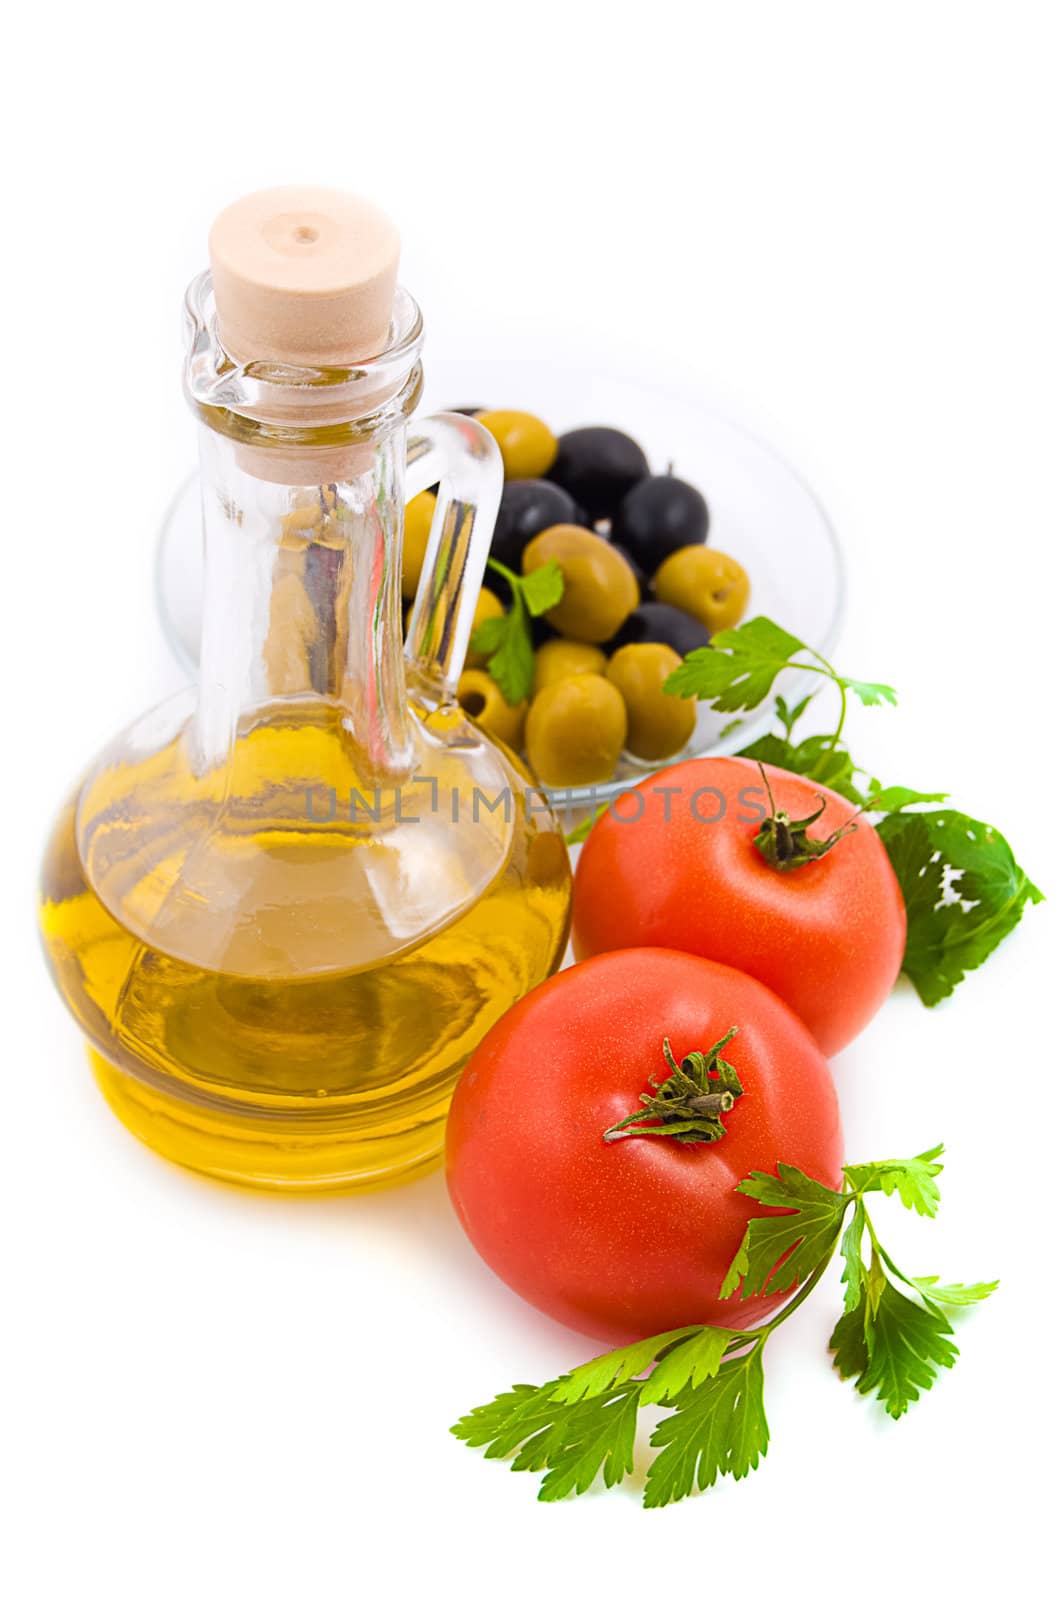 Olive oil, tomatoes and greens by Angel_a